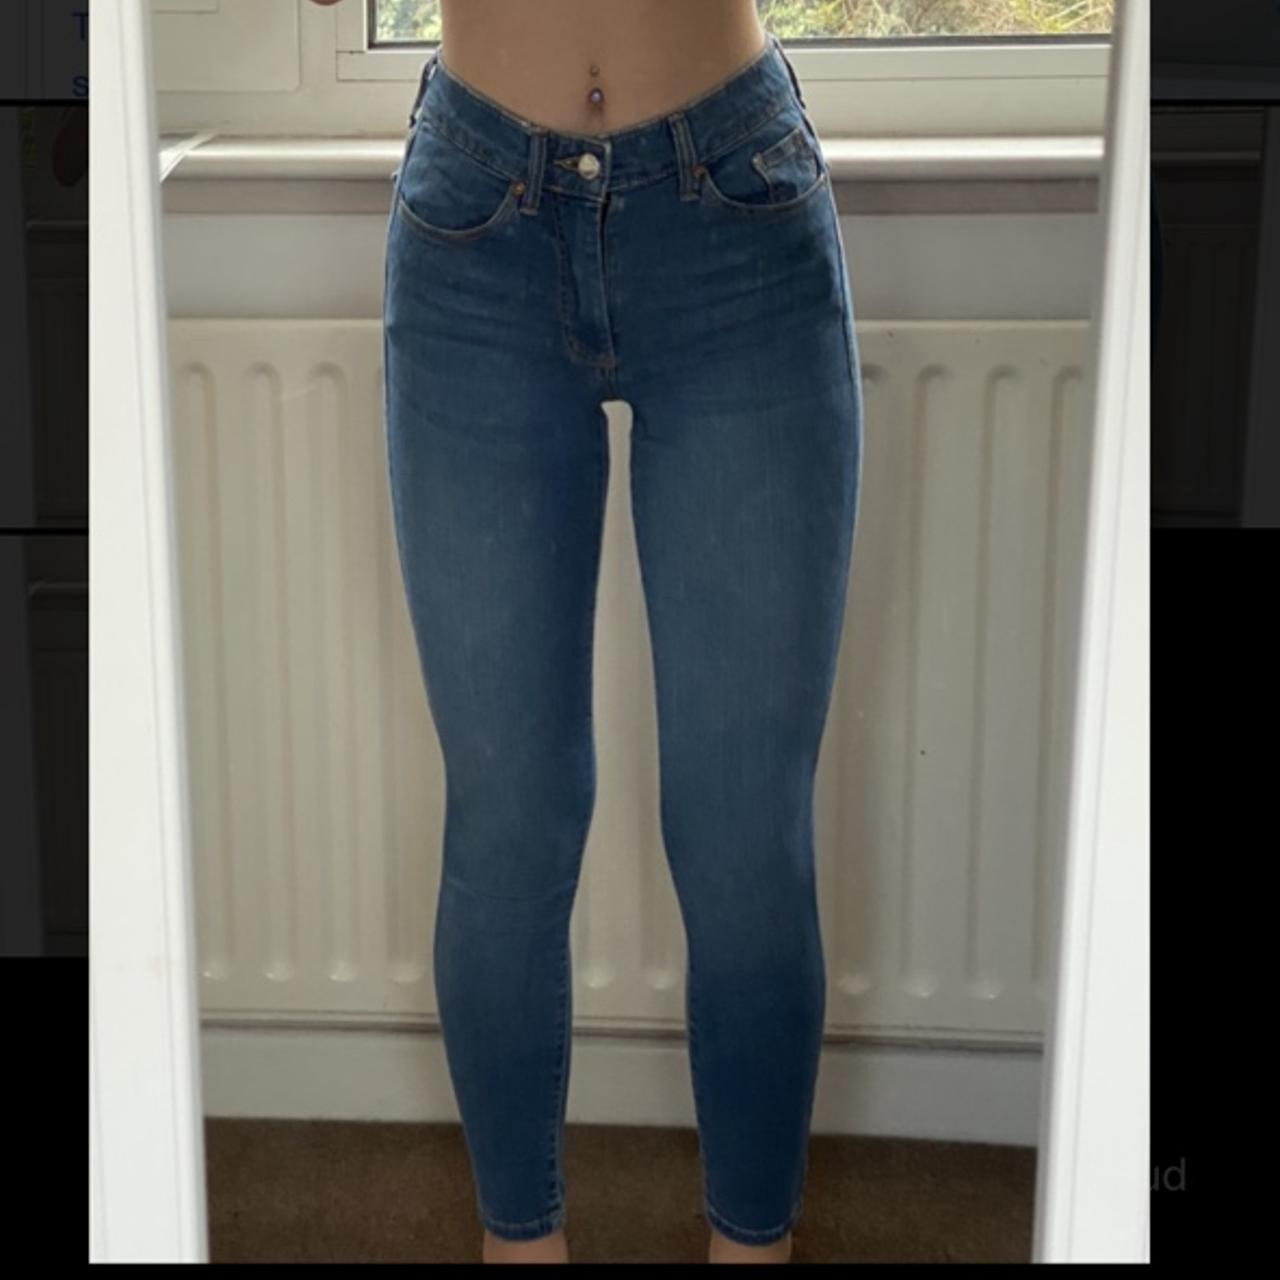 TOPSHOP JEIGH JEANS💗 •W24 L30 •Never worn out... - Depop